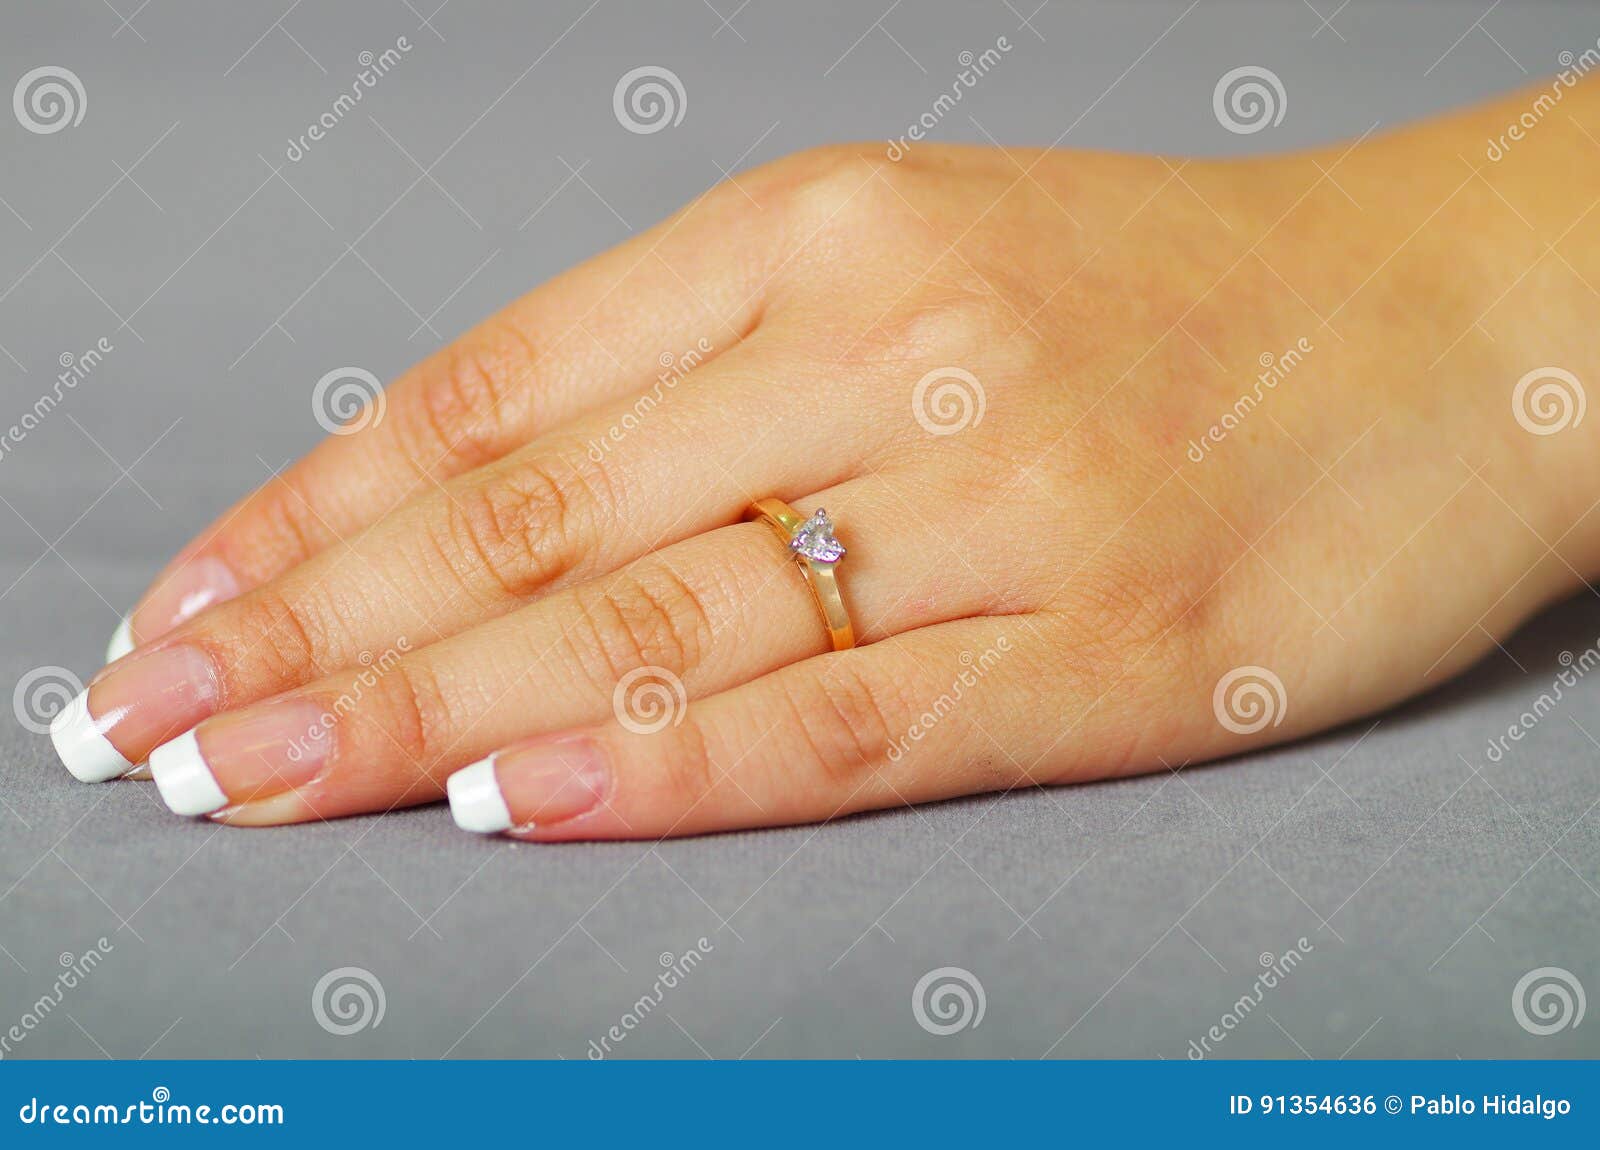 Ring finger Stock Photos, Royalty Free Ring finger Images | Depositphotos